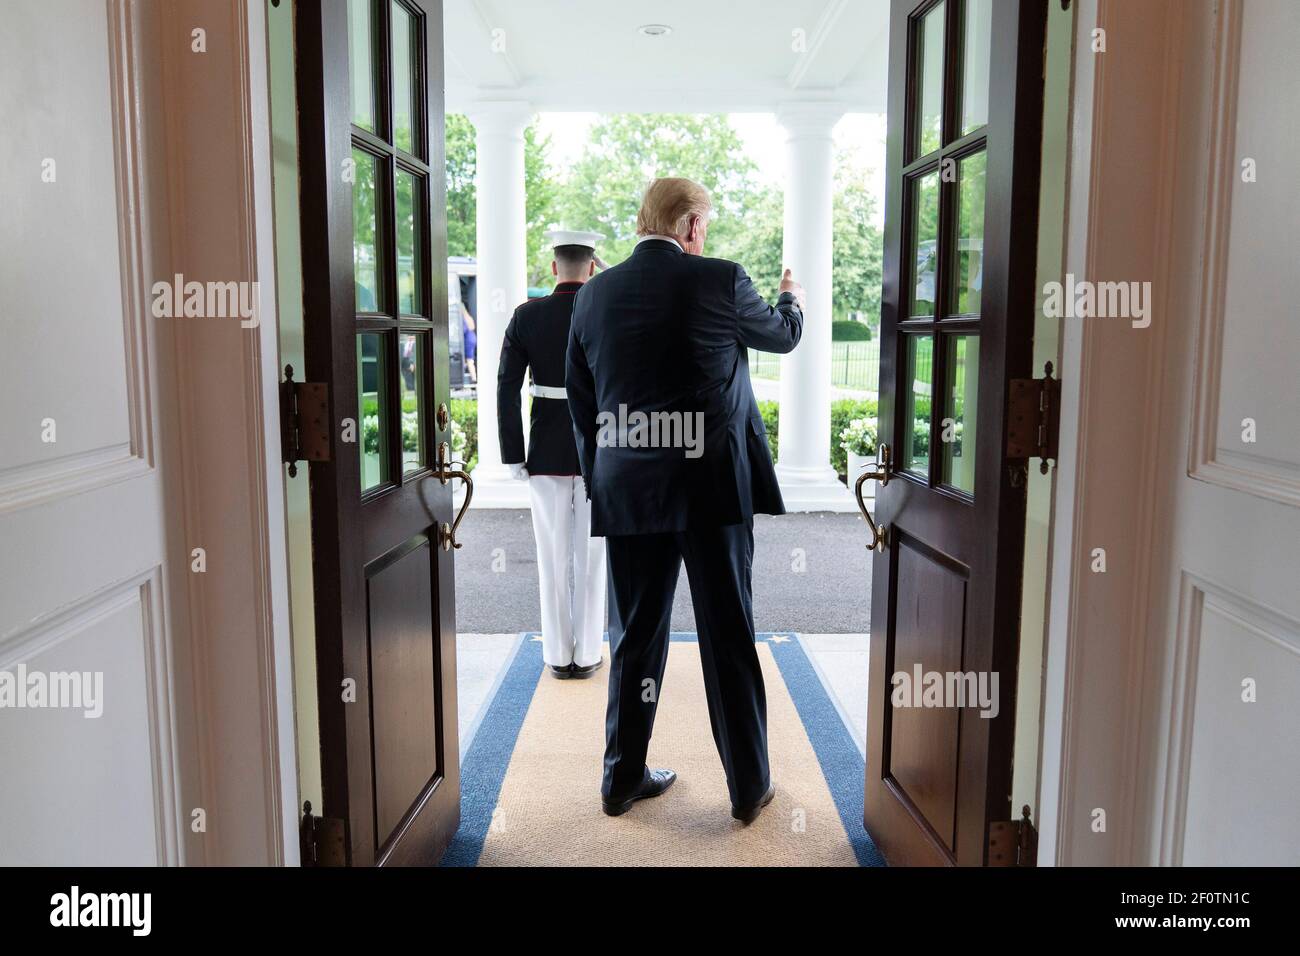 President Donald Trump bids farewell to Polish President Andrzej Duda Wednesday June 24 2020 from the West Wing entrance of the White House. Stock Photo